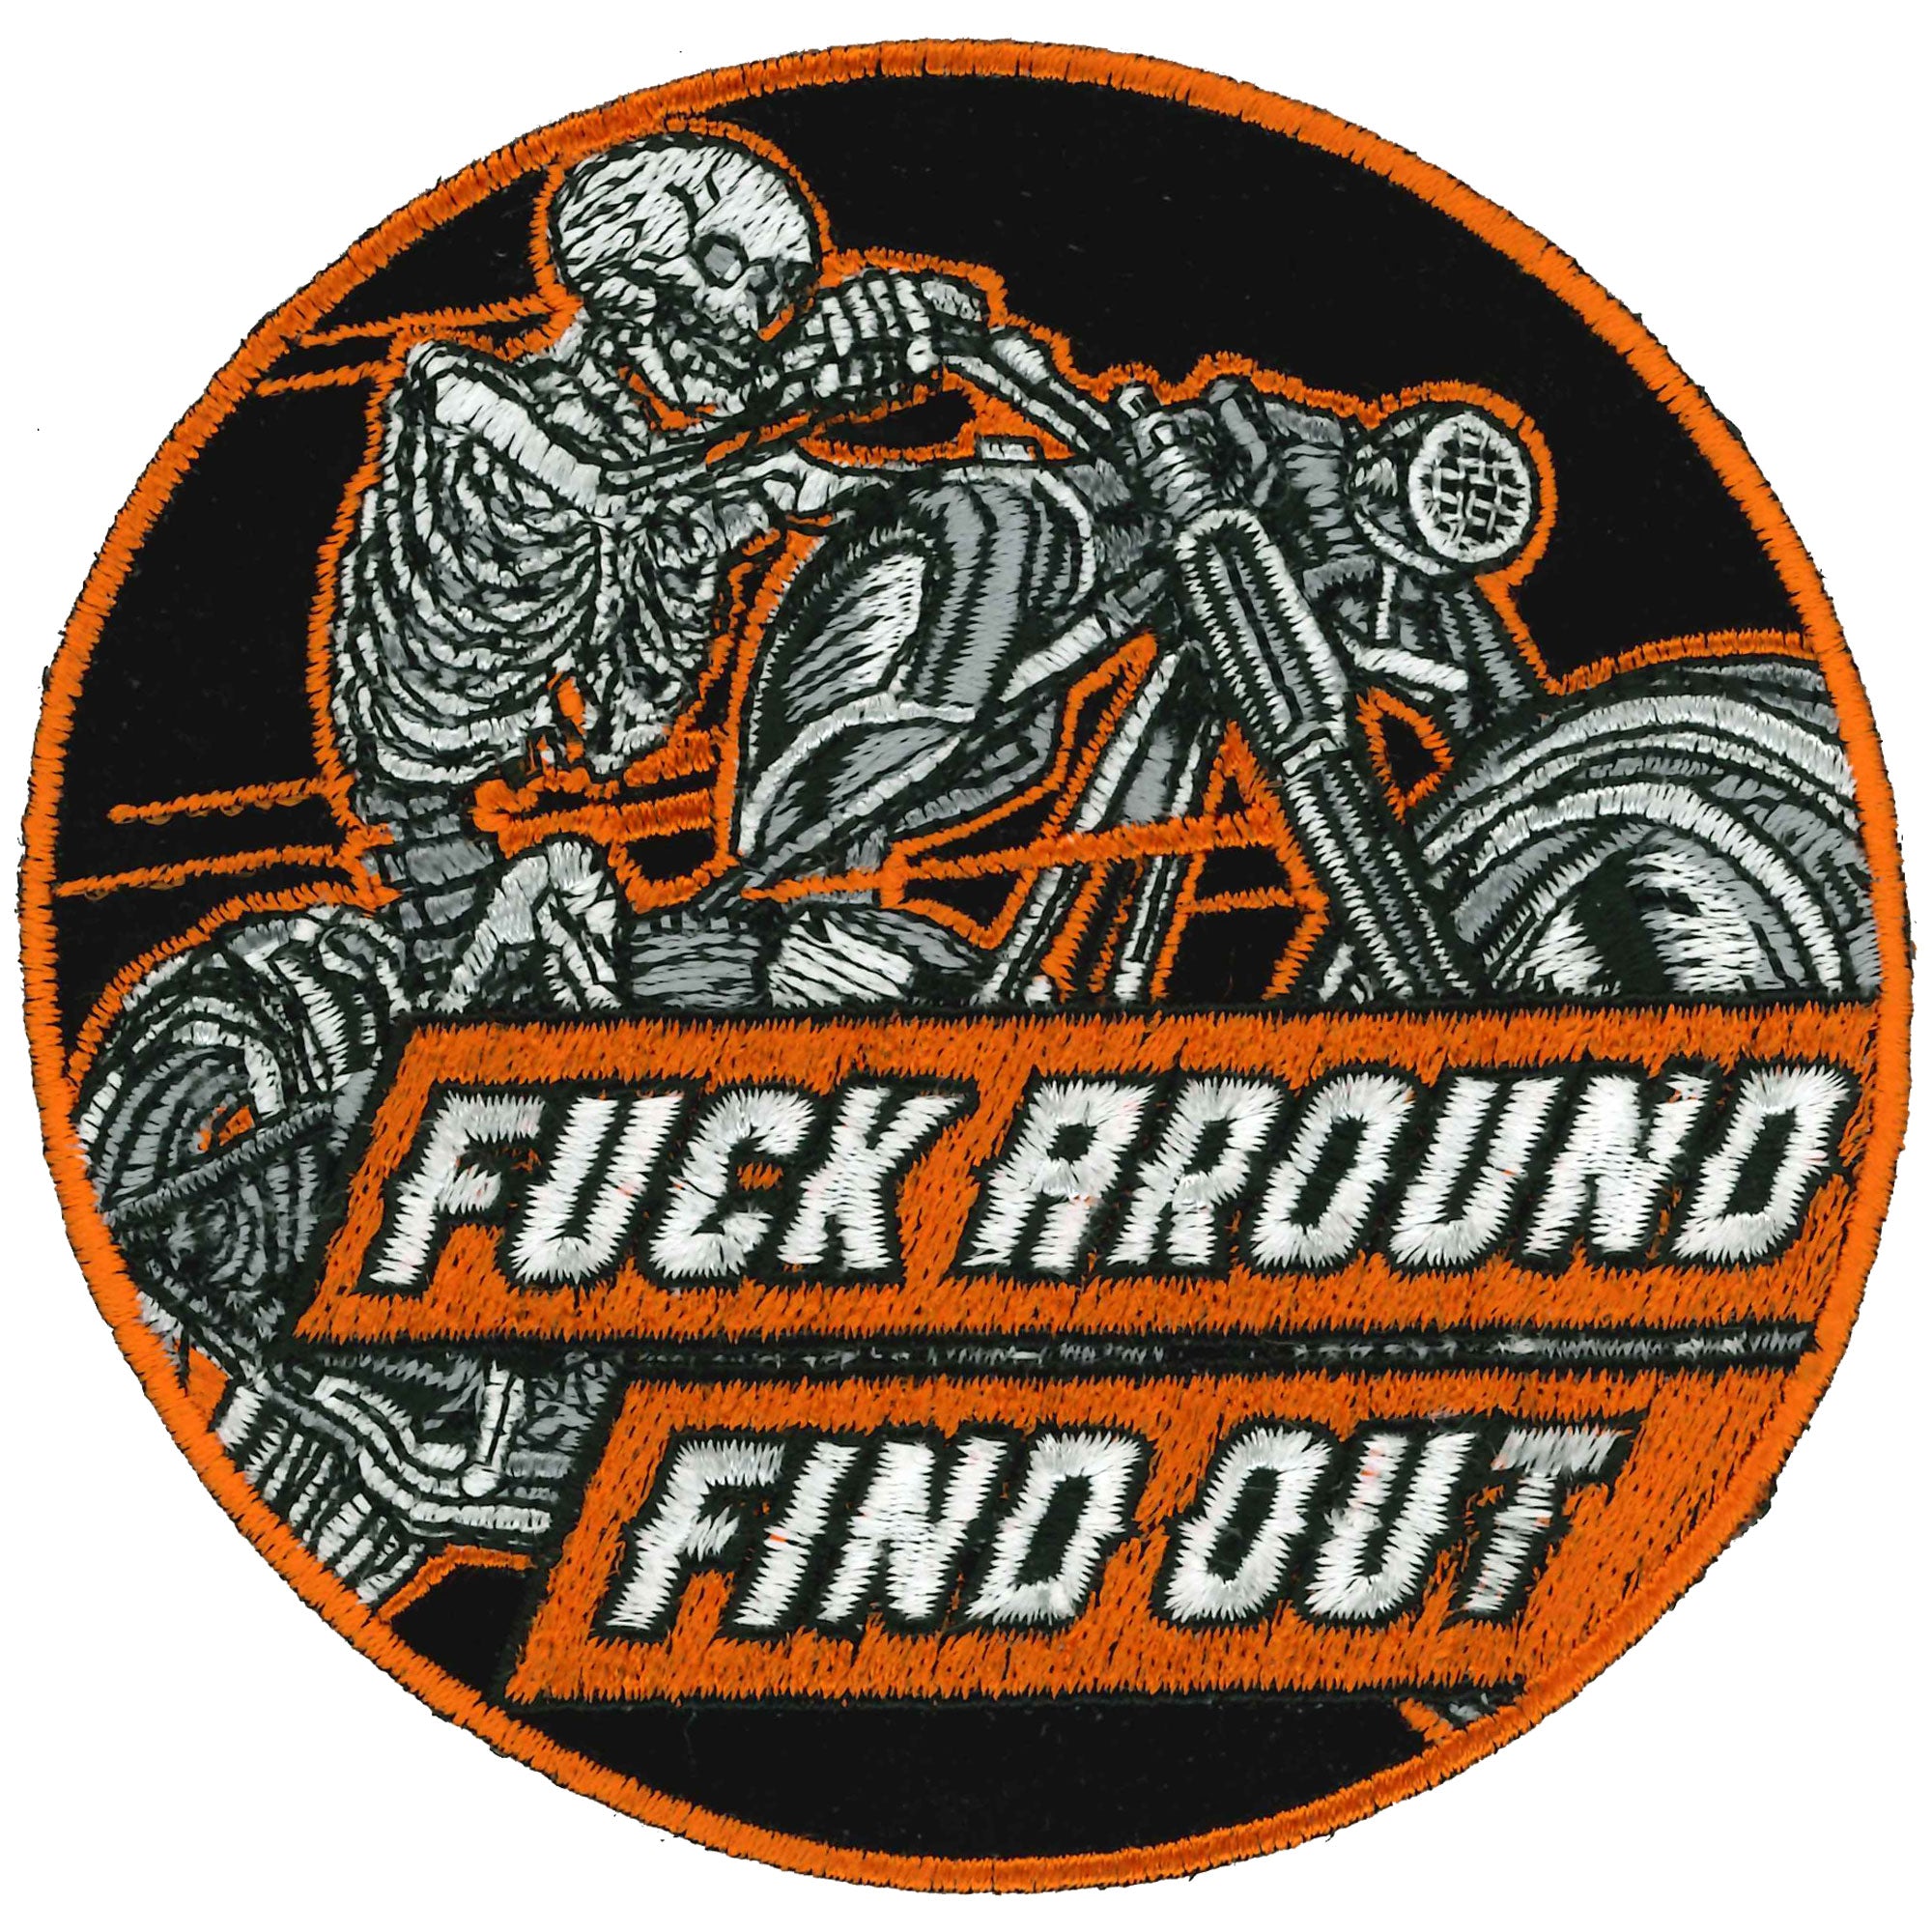 Hot Leathers F*** Around and Find out Skeleton 4" Circle Patch